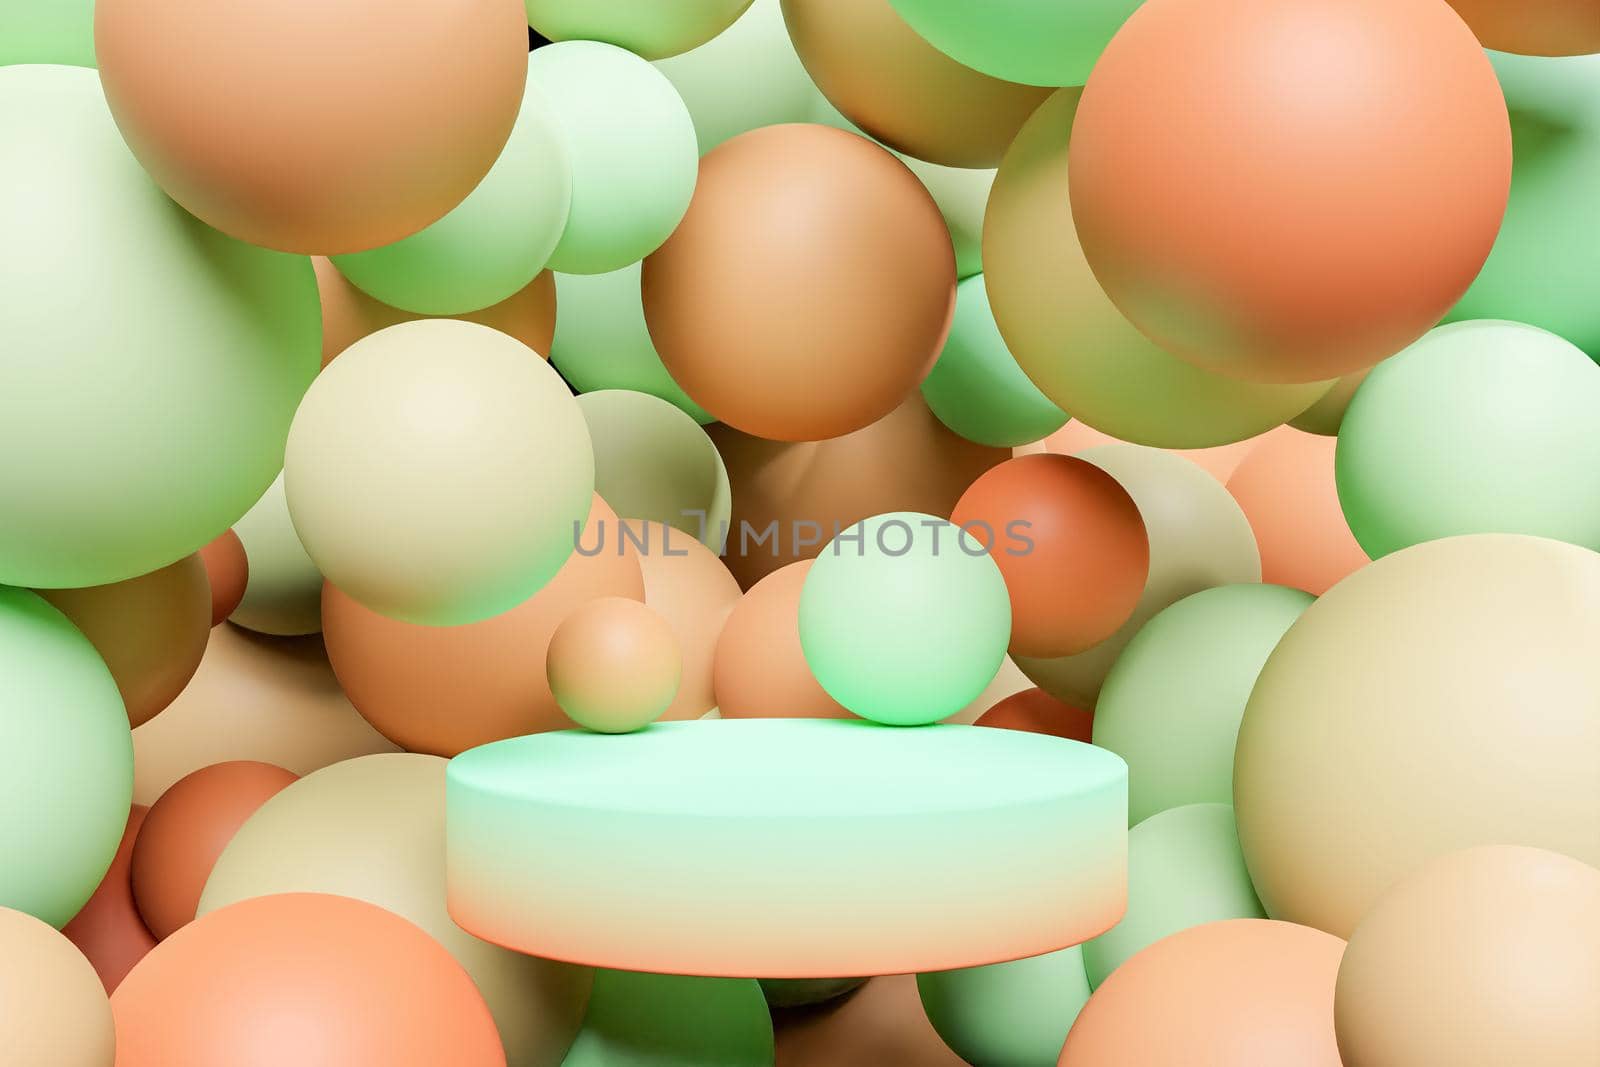 cylinder for product presentation surrounded by spheres of gradient color by asolano